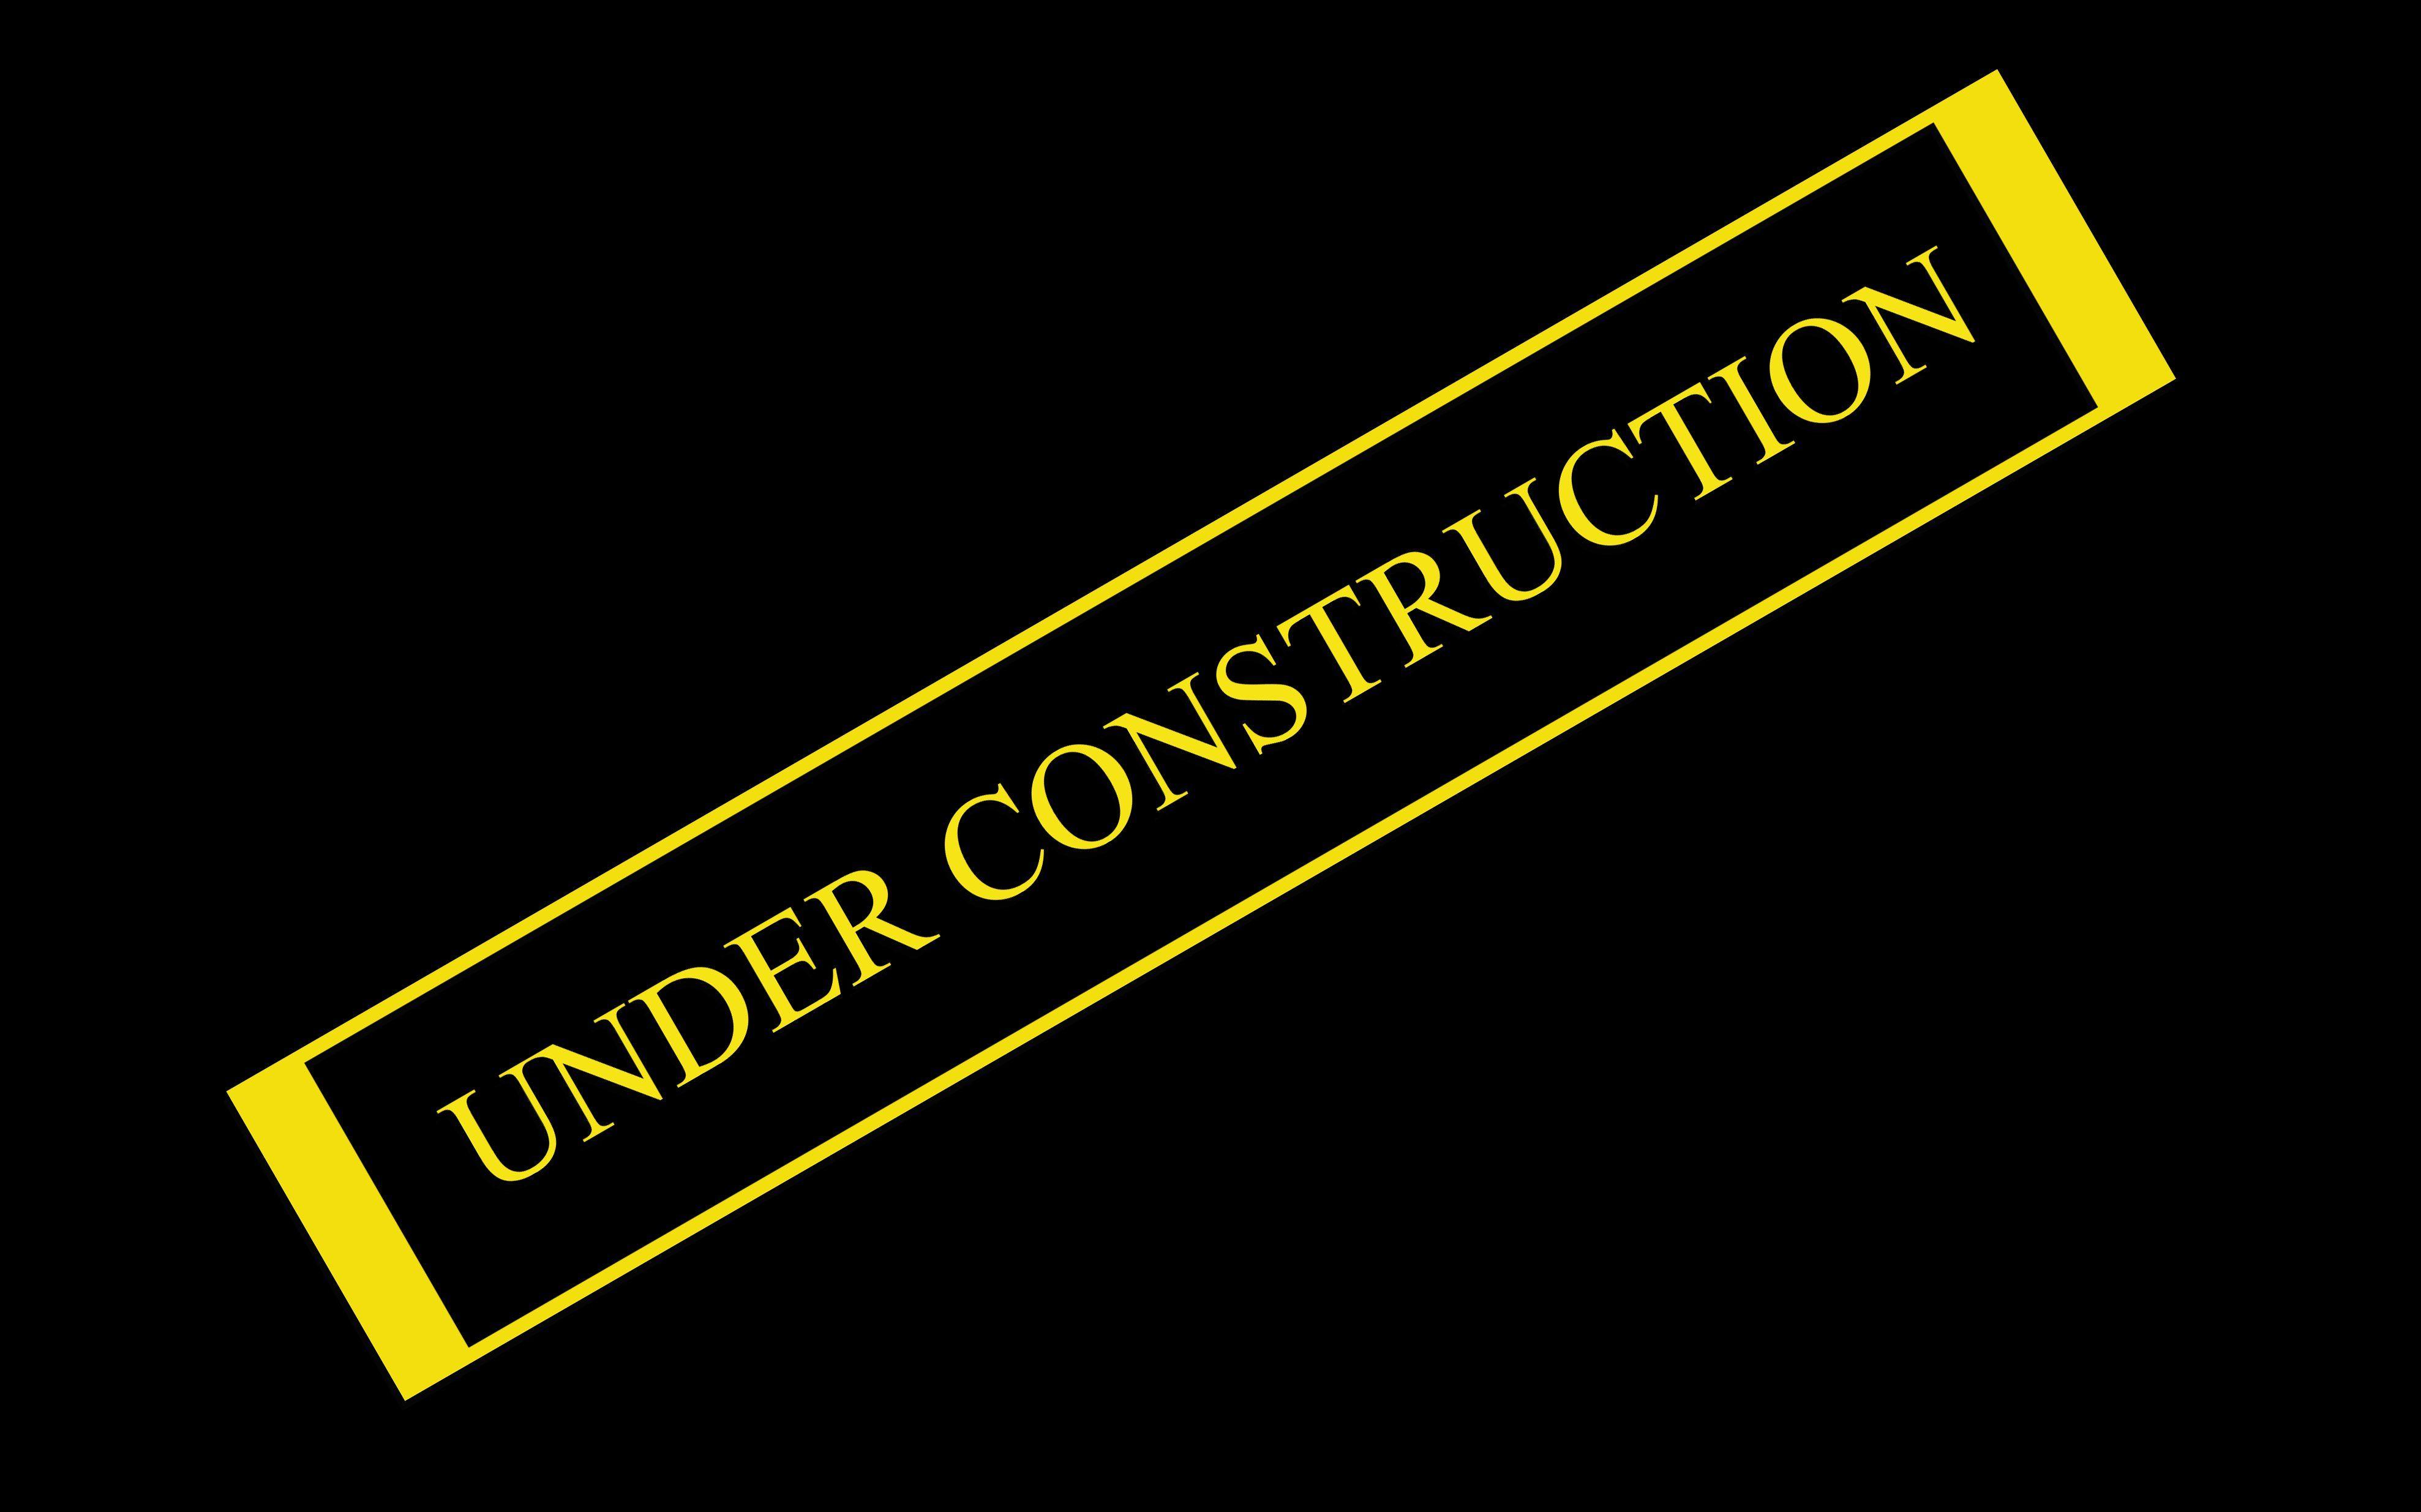 Under construction sign work computer humor funny text maintenance